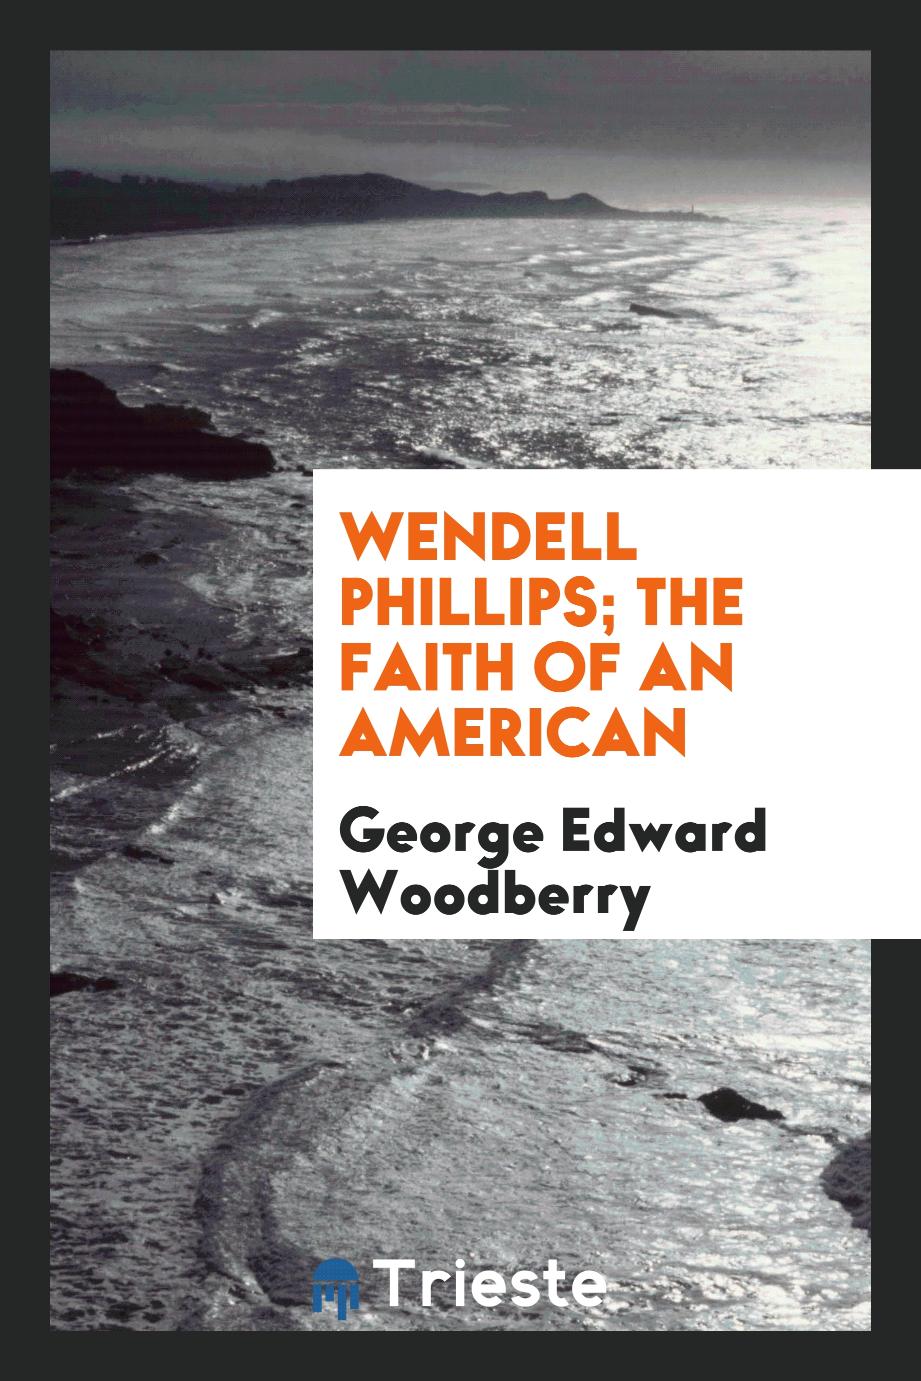 George Edward Woodberry - Wendell Phillips; the faith of an American